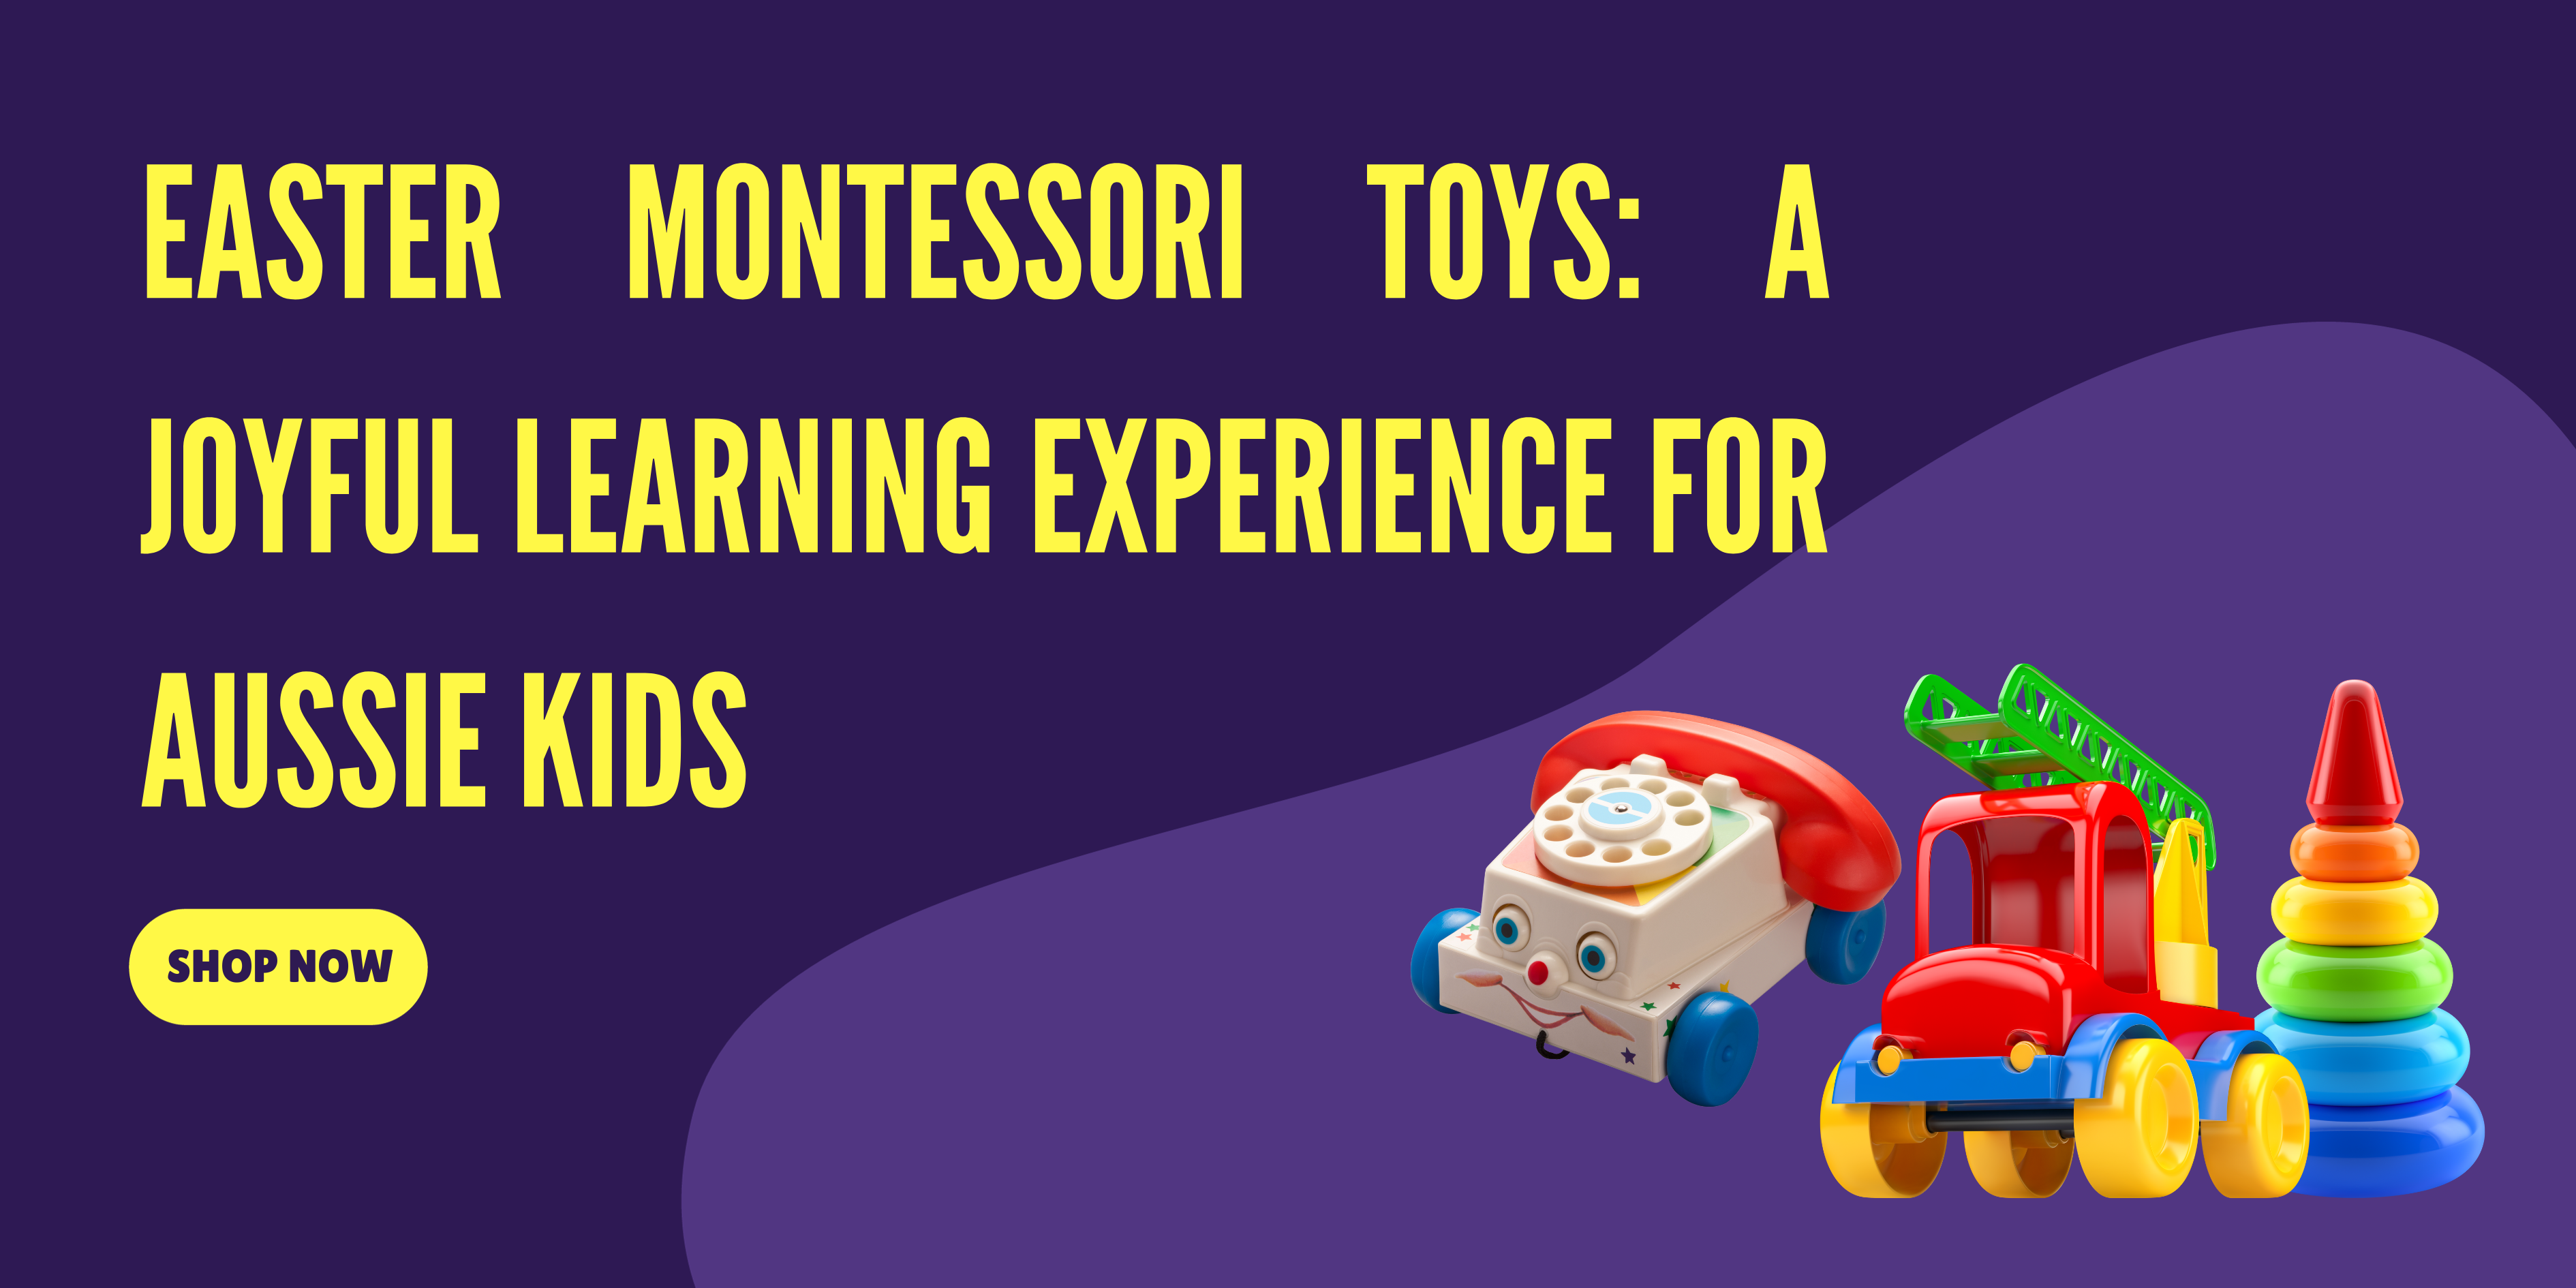 Easter Montessori Toys: A Joyful Learning Experience for Aussie Kids